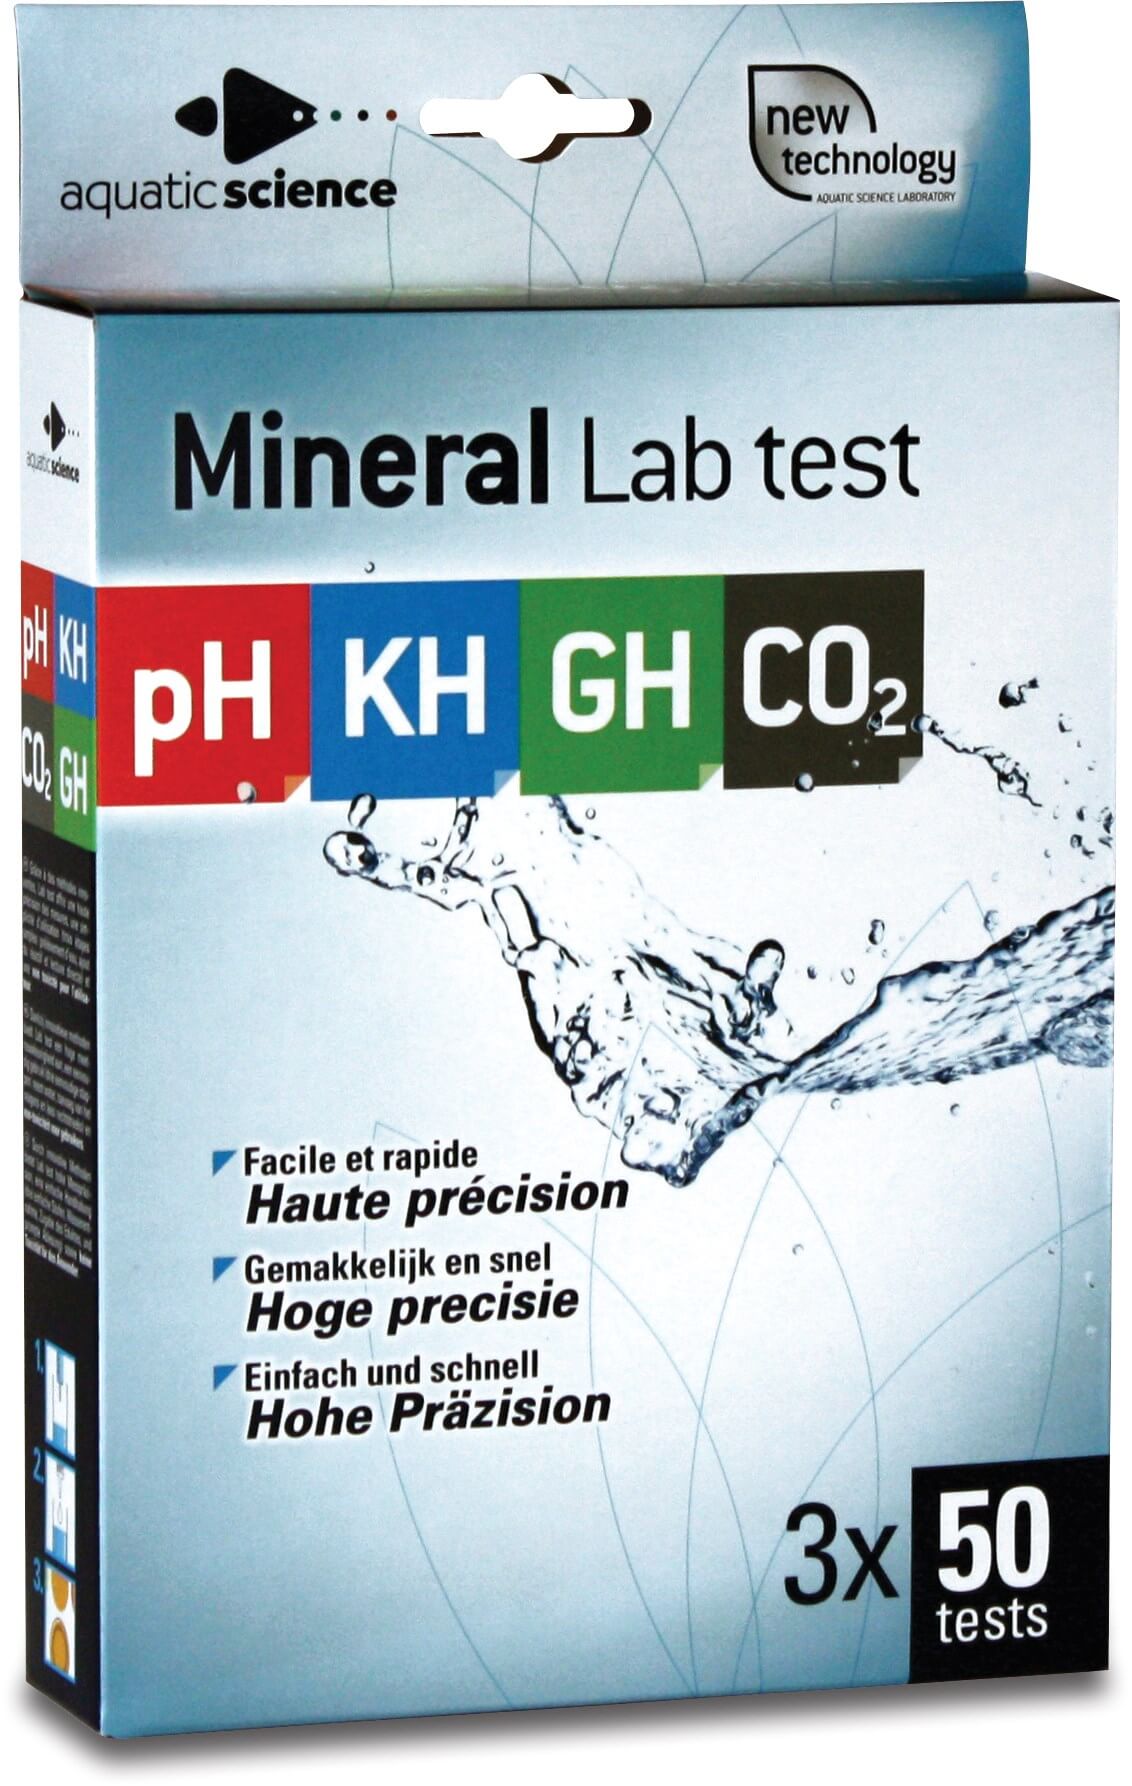 Mineral lab test type PH-KH-GH-CO2